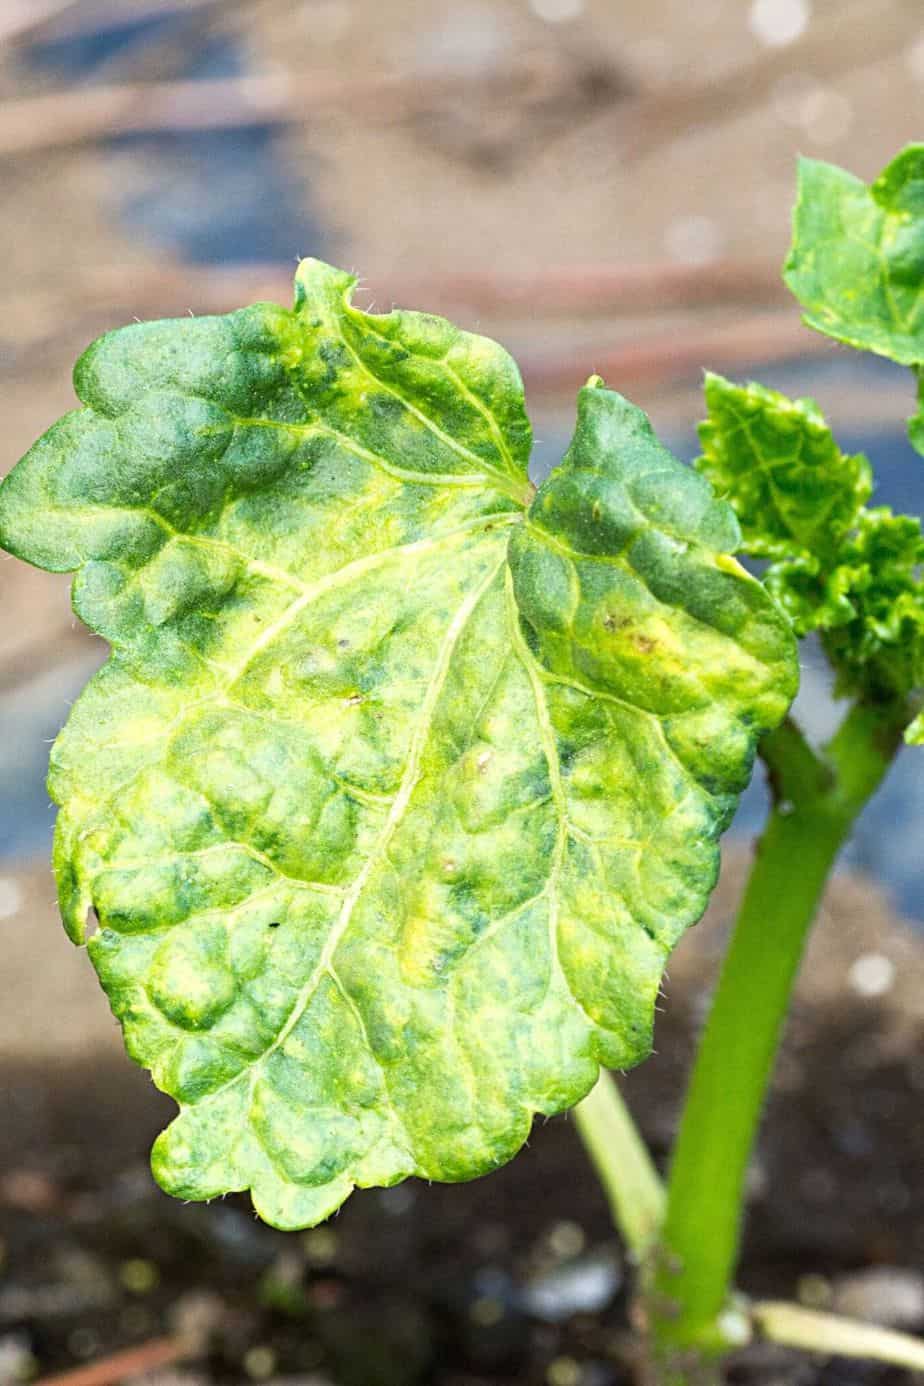 One sign that your plant is infested with root aphids is the leaves turning to a yellow color